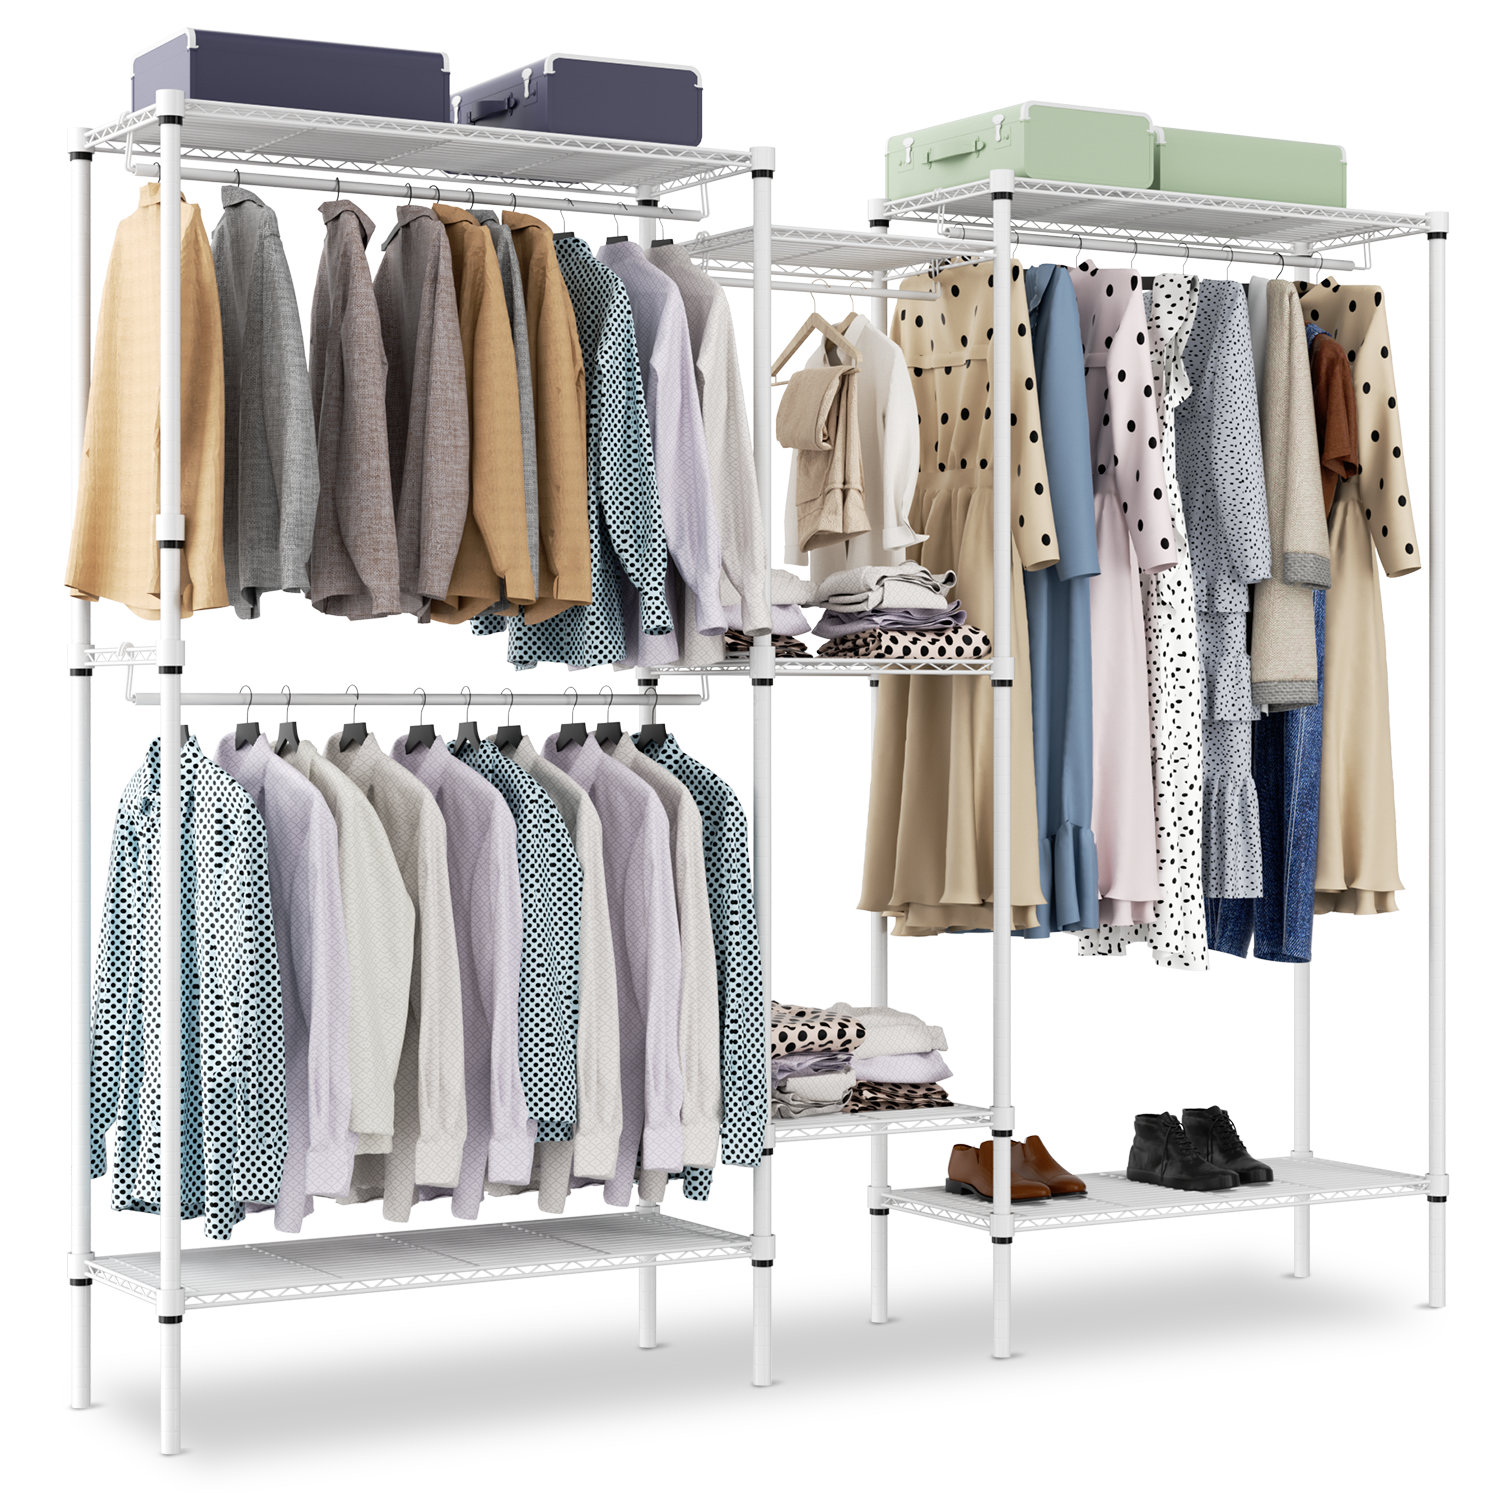 Rebrilliant Lowrine 71 H Detachable Metal Freestanding Clothes Rack with 4 Hang Rods